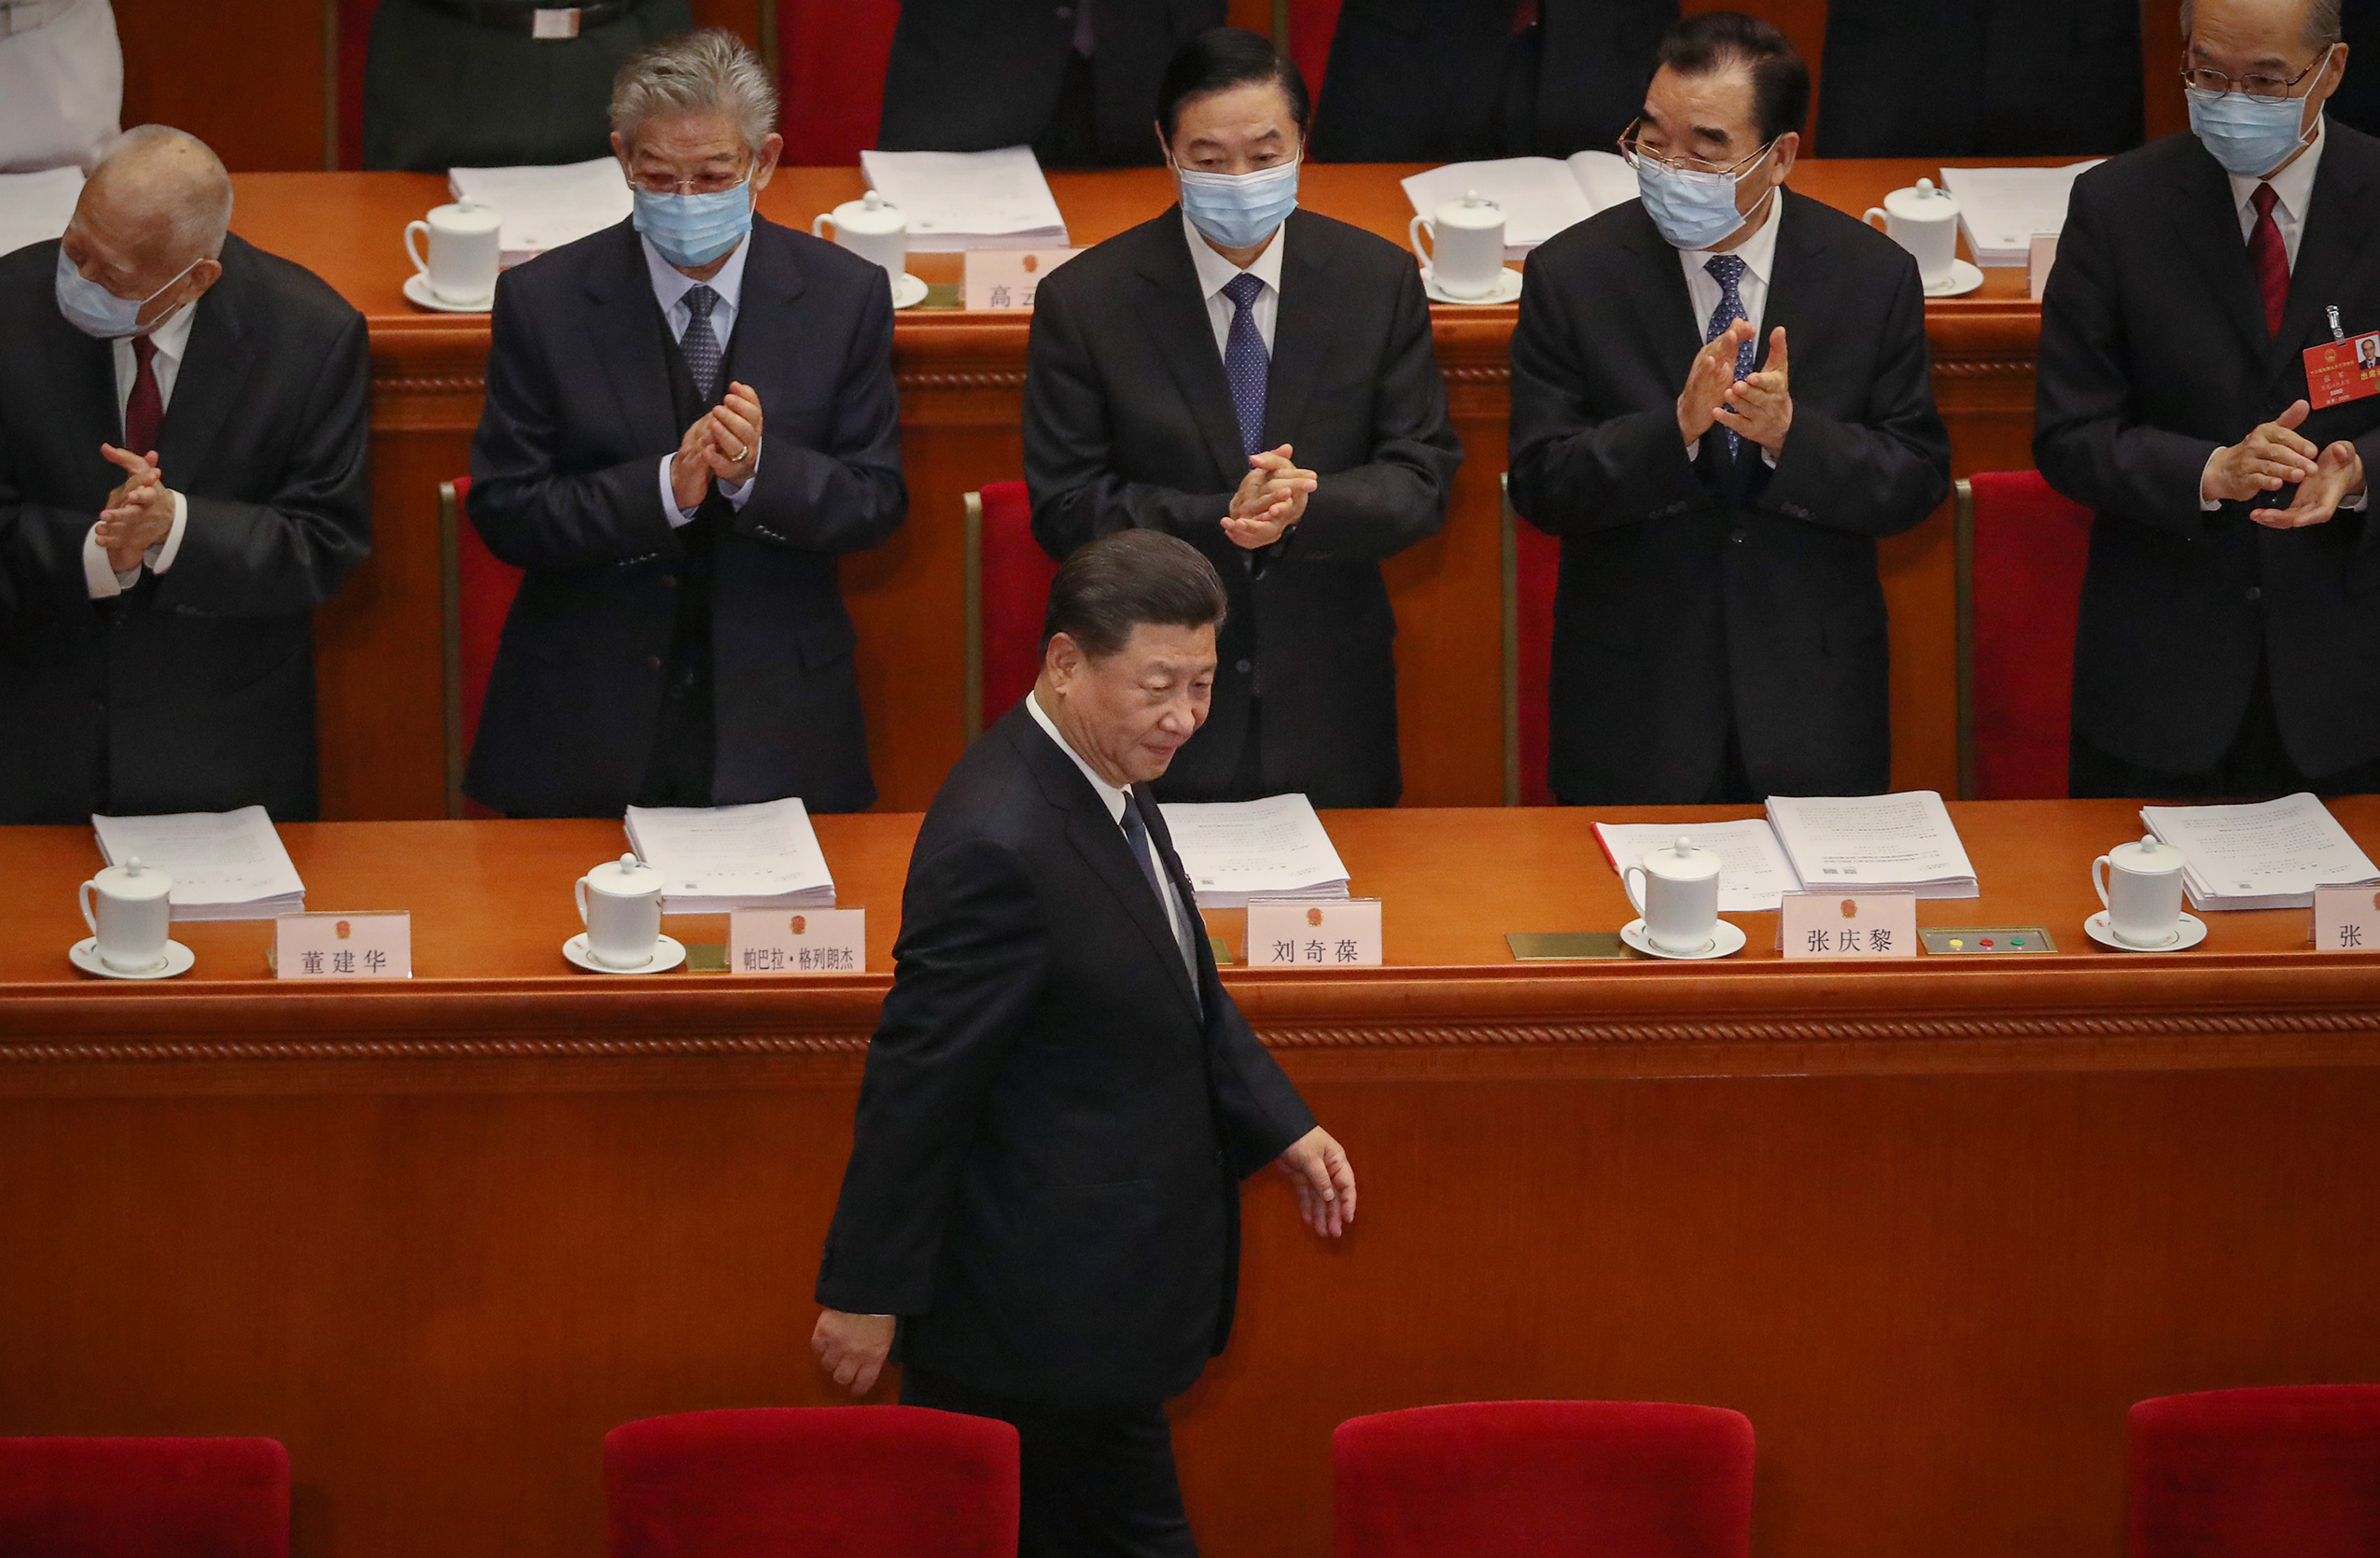 BEIJING, CHINA - MAY 22: Chinese President Xi Jinping arrives at The Great Hall of the People for the opening of the National People's Congress on May 22, 2020 in Beijing, China. China is holding now its annual Two Sessions political meetings, that were delayed since March due to the Covid19 outbreak. (Photo by Andrea Verdelli/Getty Images)